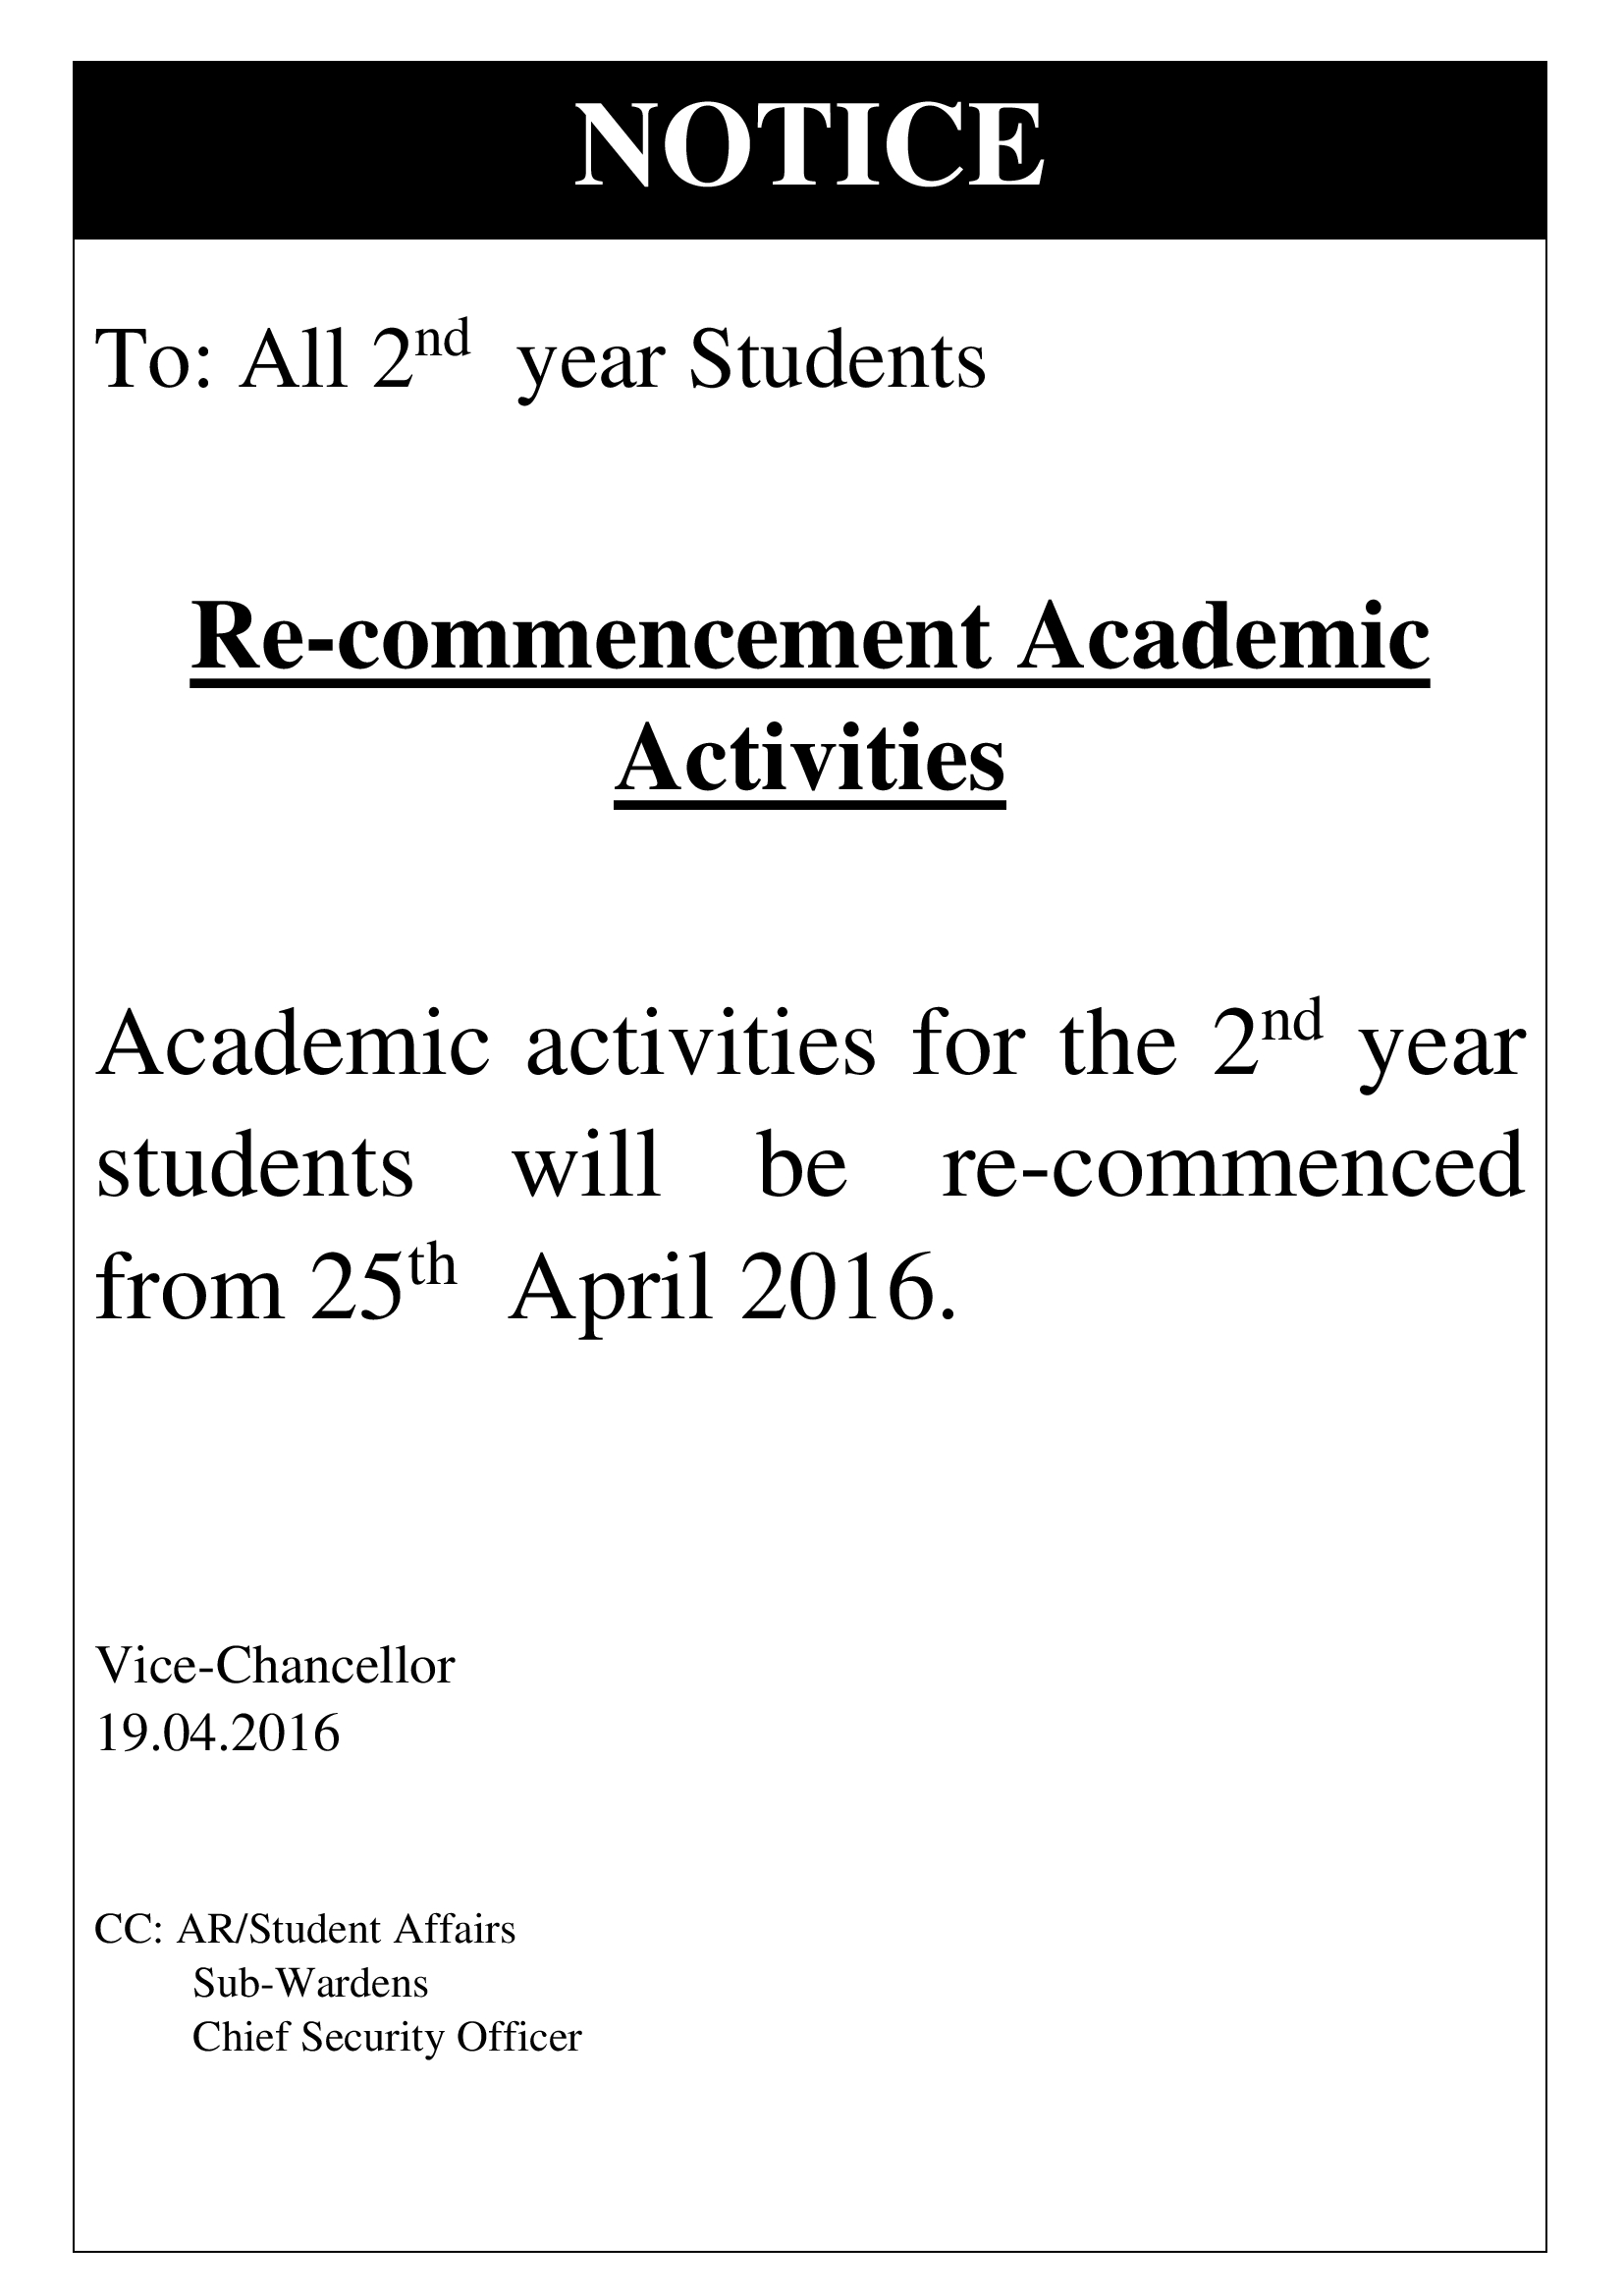 Recommencement-Notice_2nd_year